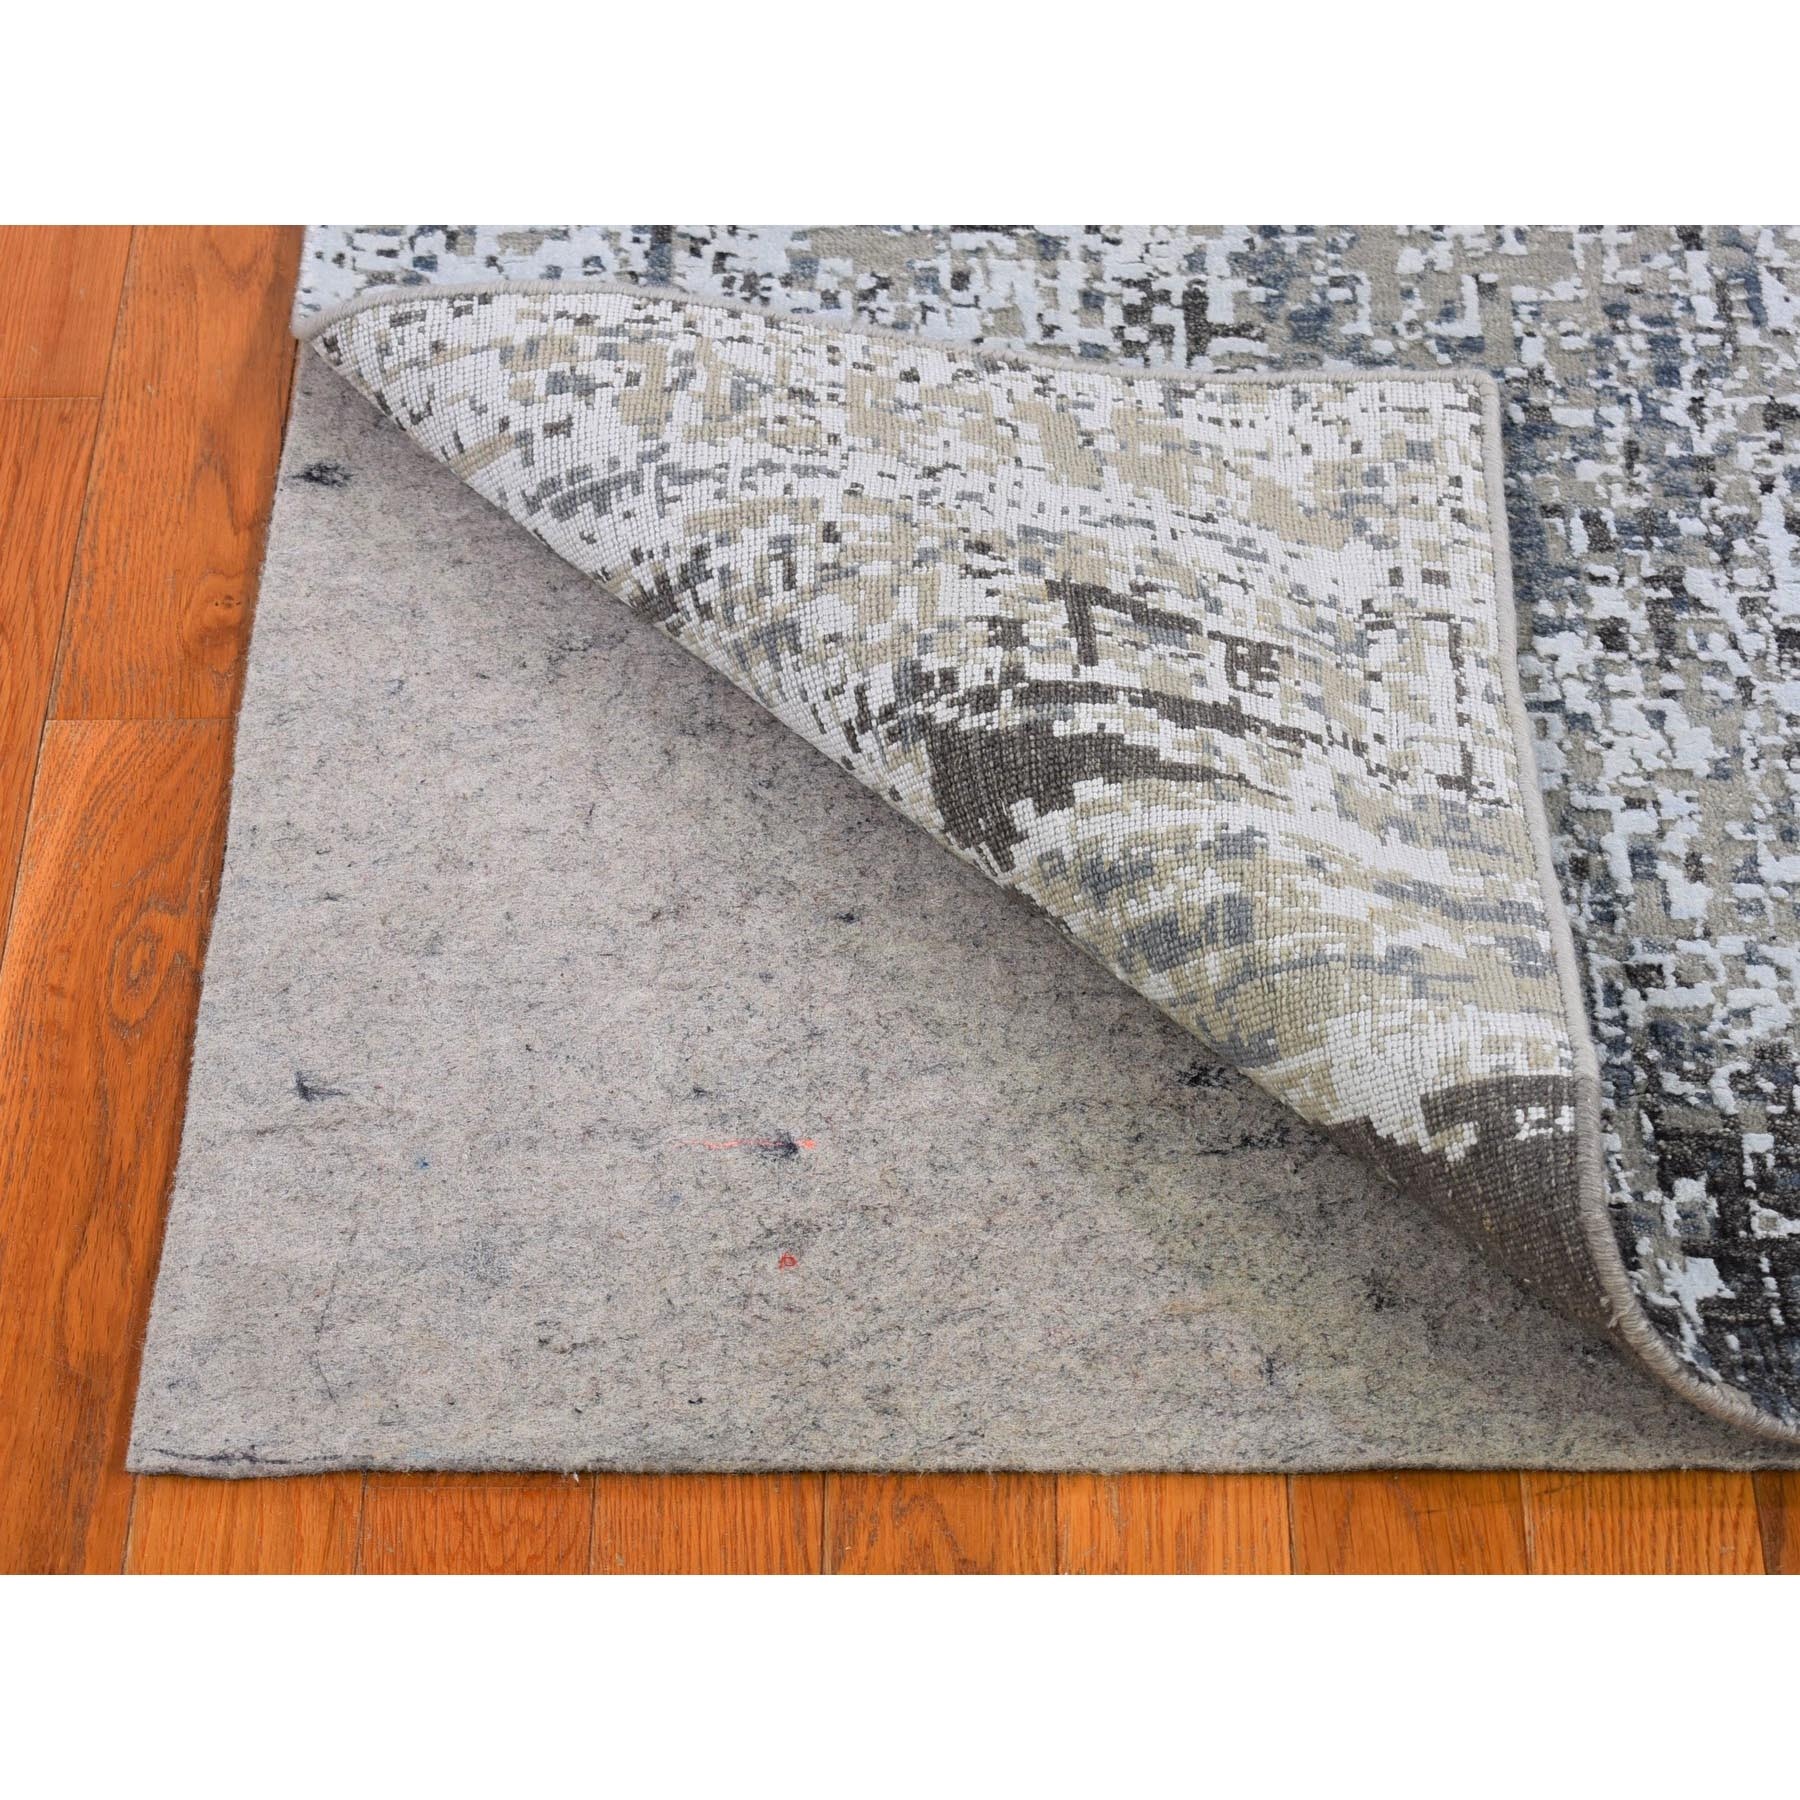 2'6"x12' Wool and Silk Persian Knot Runner Abstract Design Denser Weave Silver Hand Woven Oriental Rug 